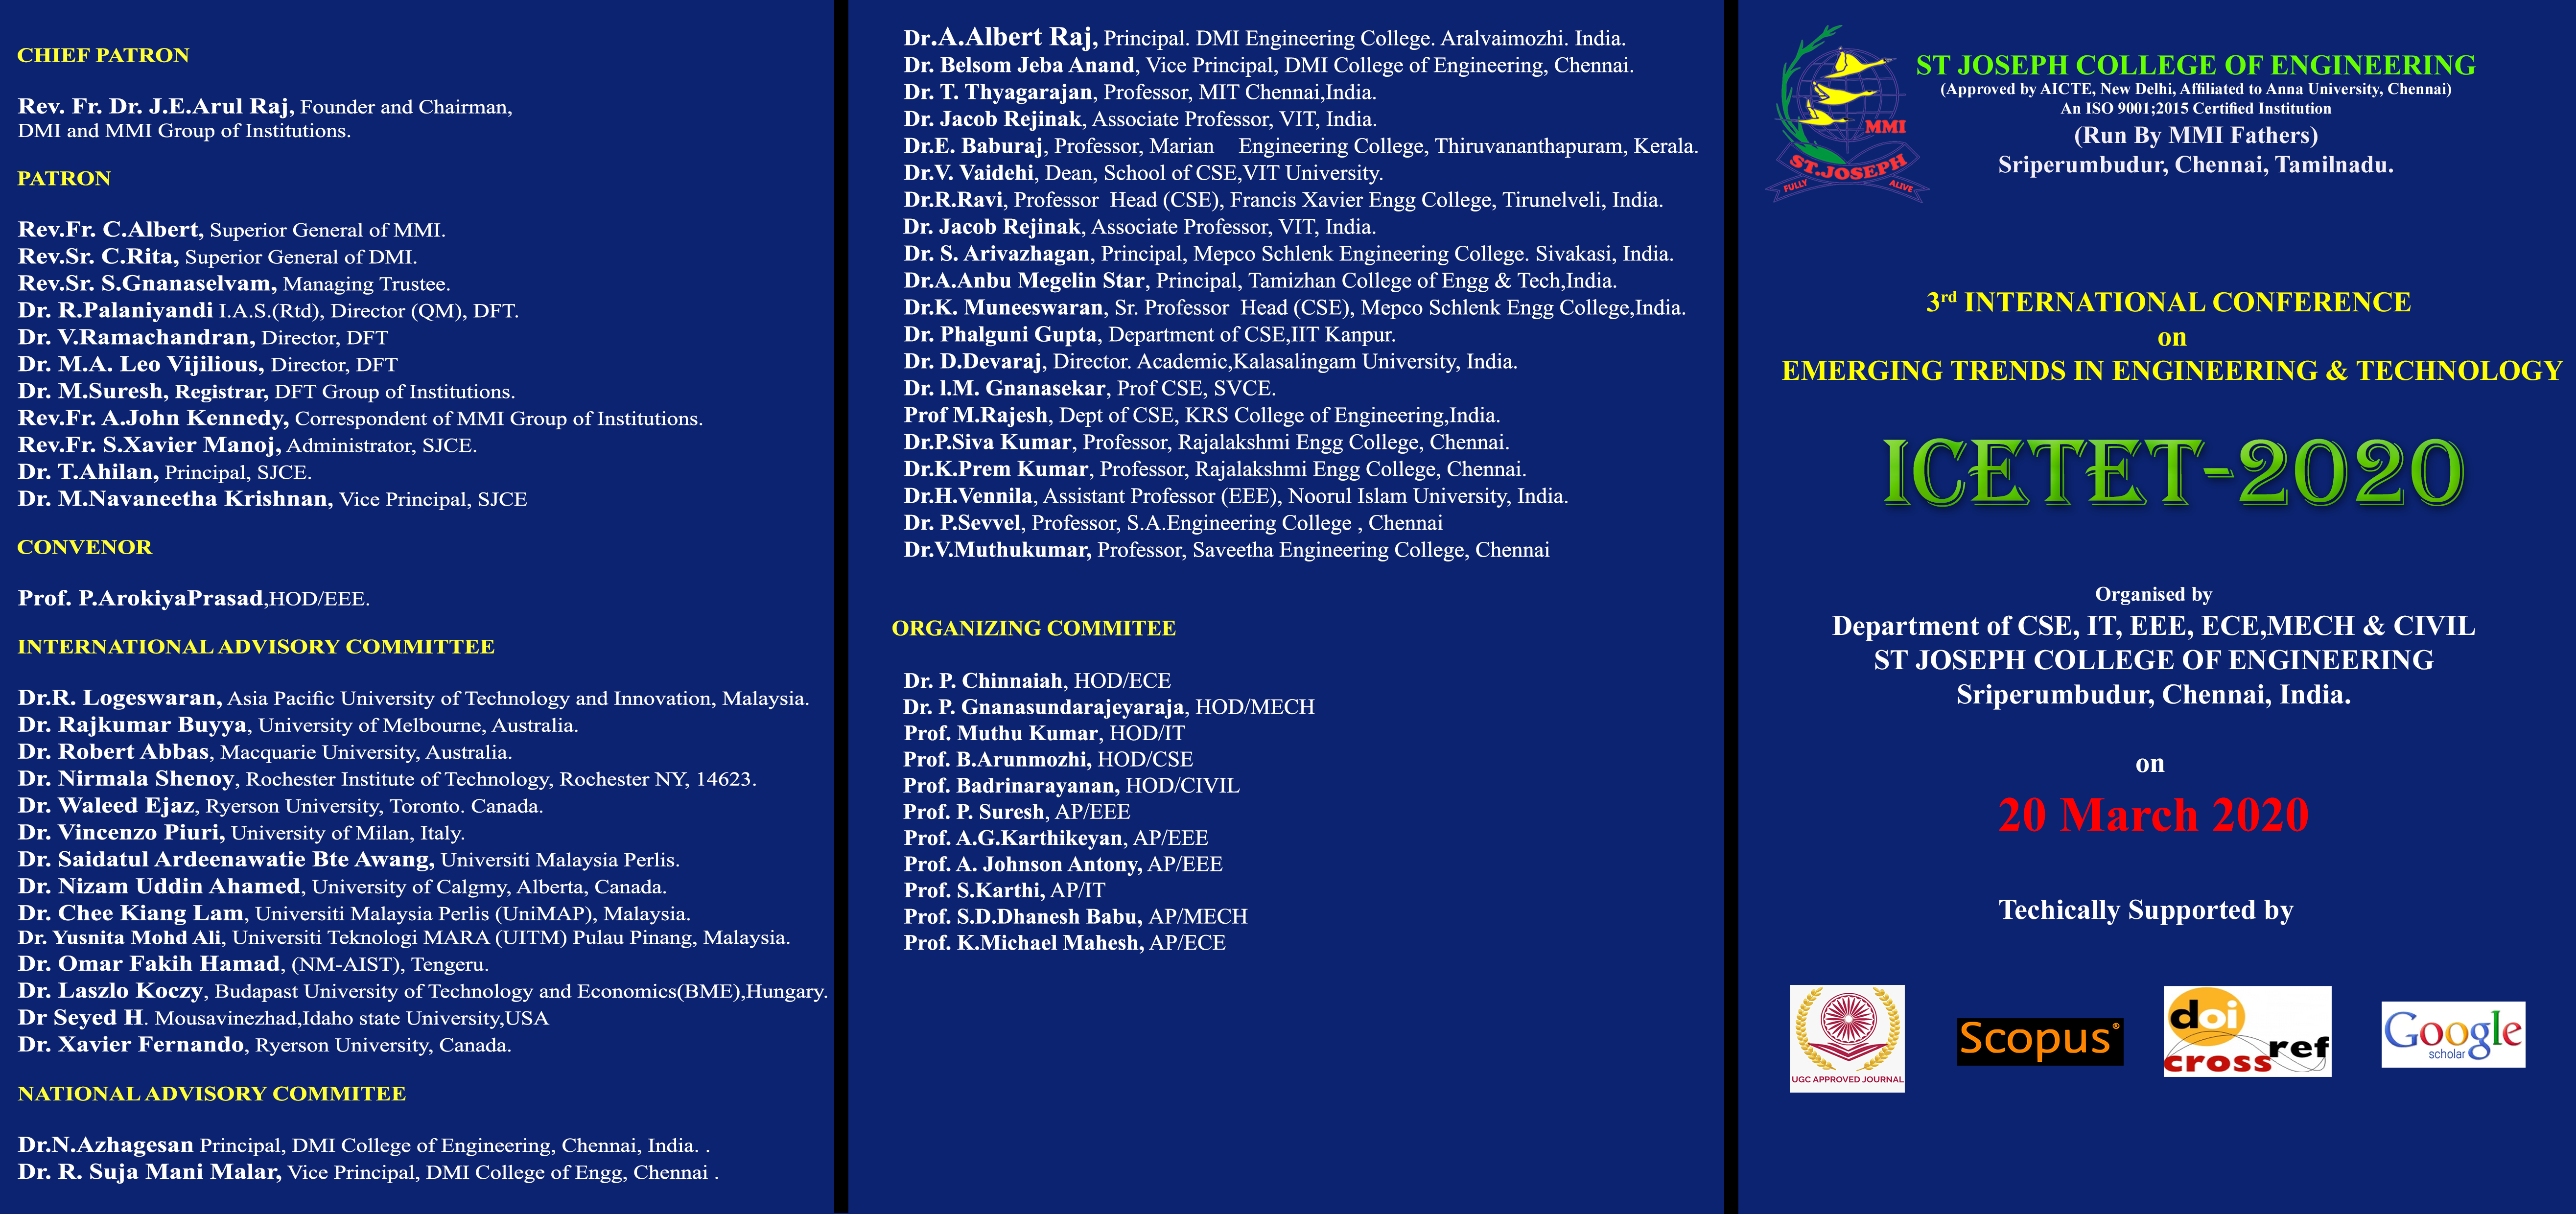 3rd INTERNATIONAL CONFERENCE OF EMERGING TRENDS IN ENGINEERING AND TECHNOLOGY, Chennai, Tamil Nadu, India